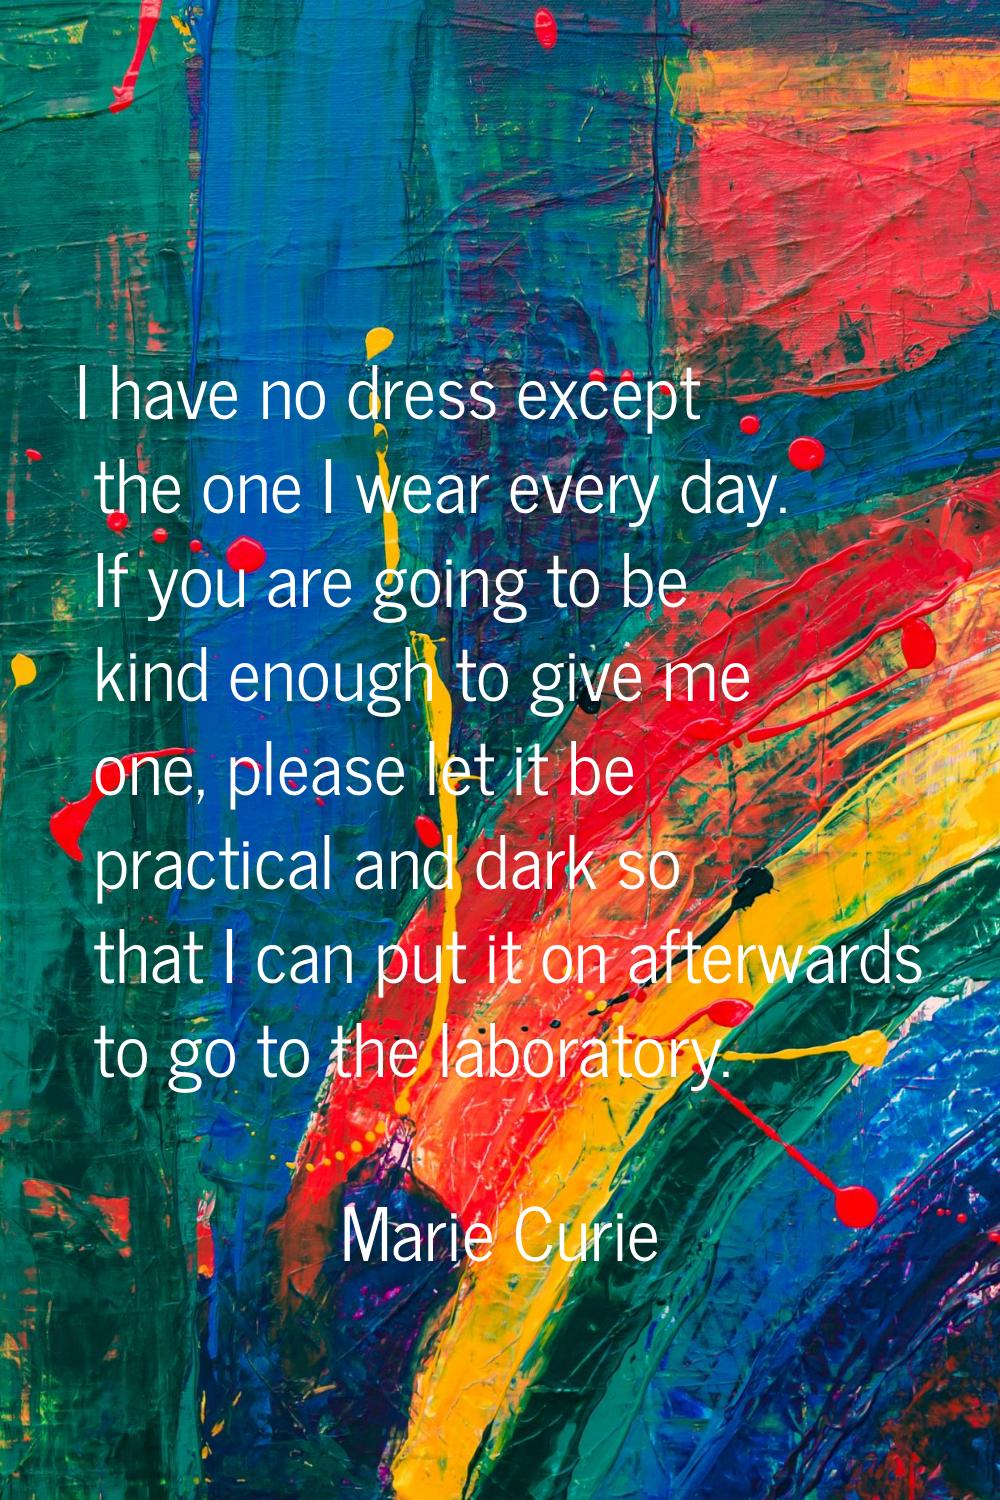 I have no dress except the one I wear every day. If you are going to be kind enough to give me one,